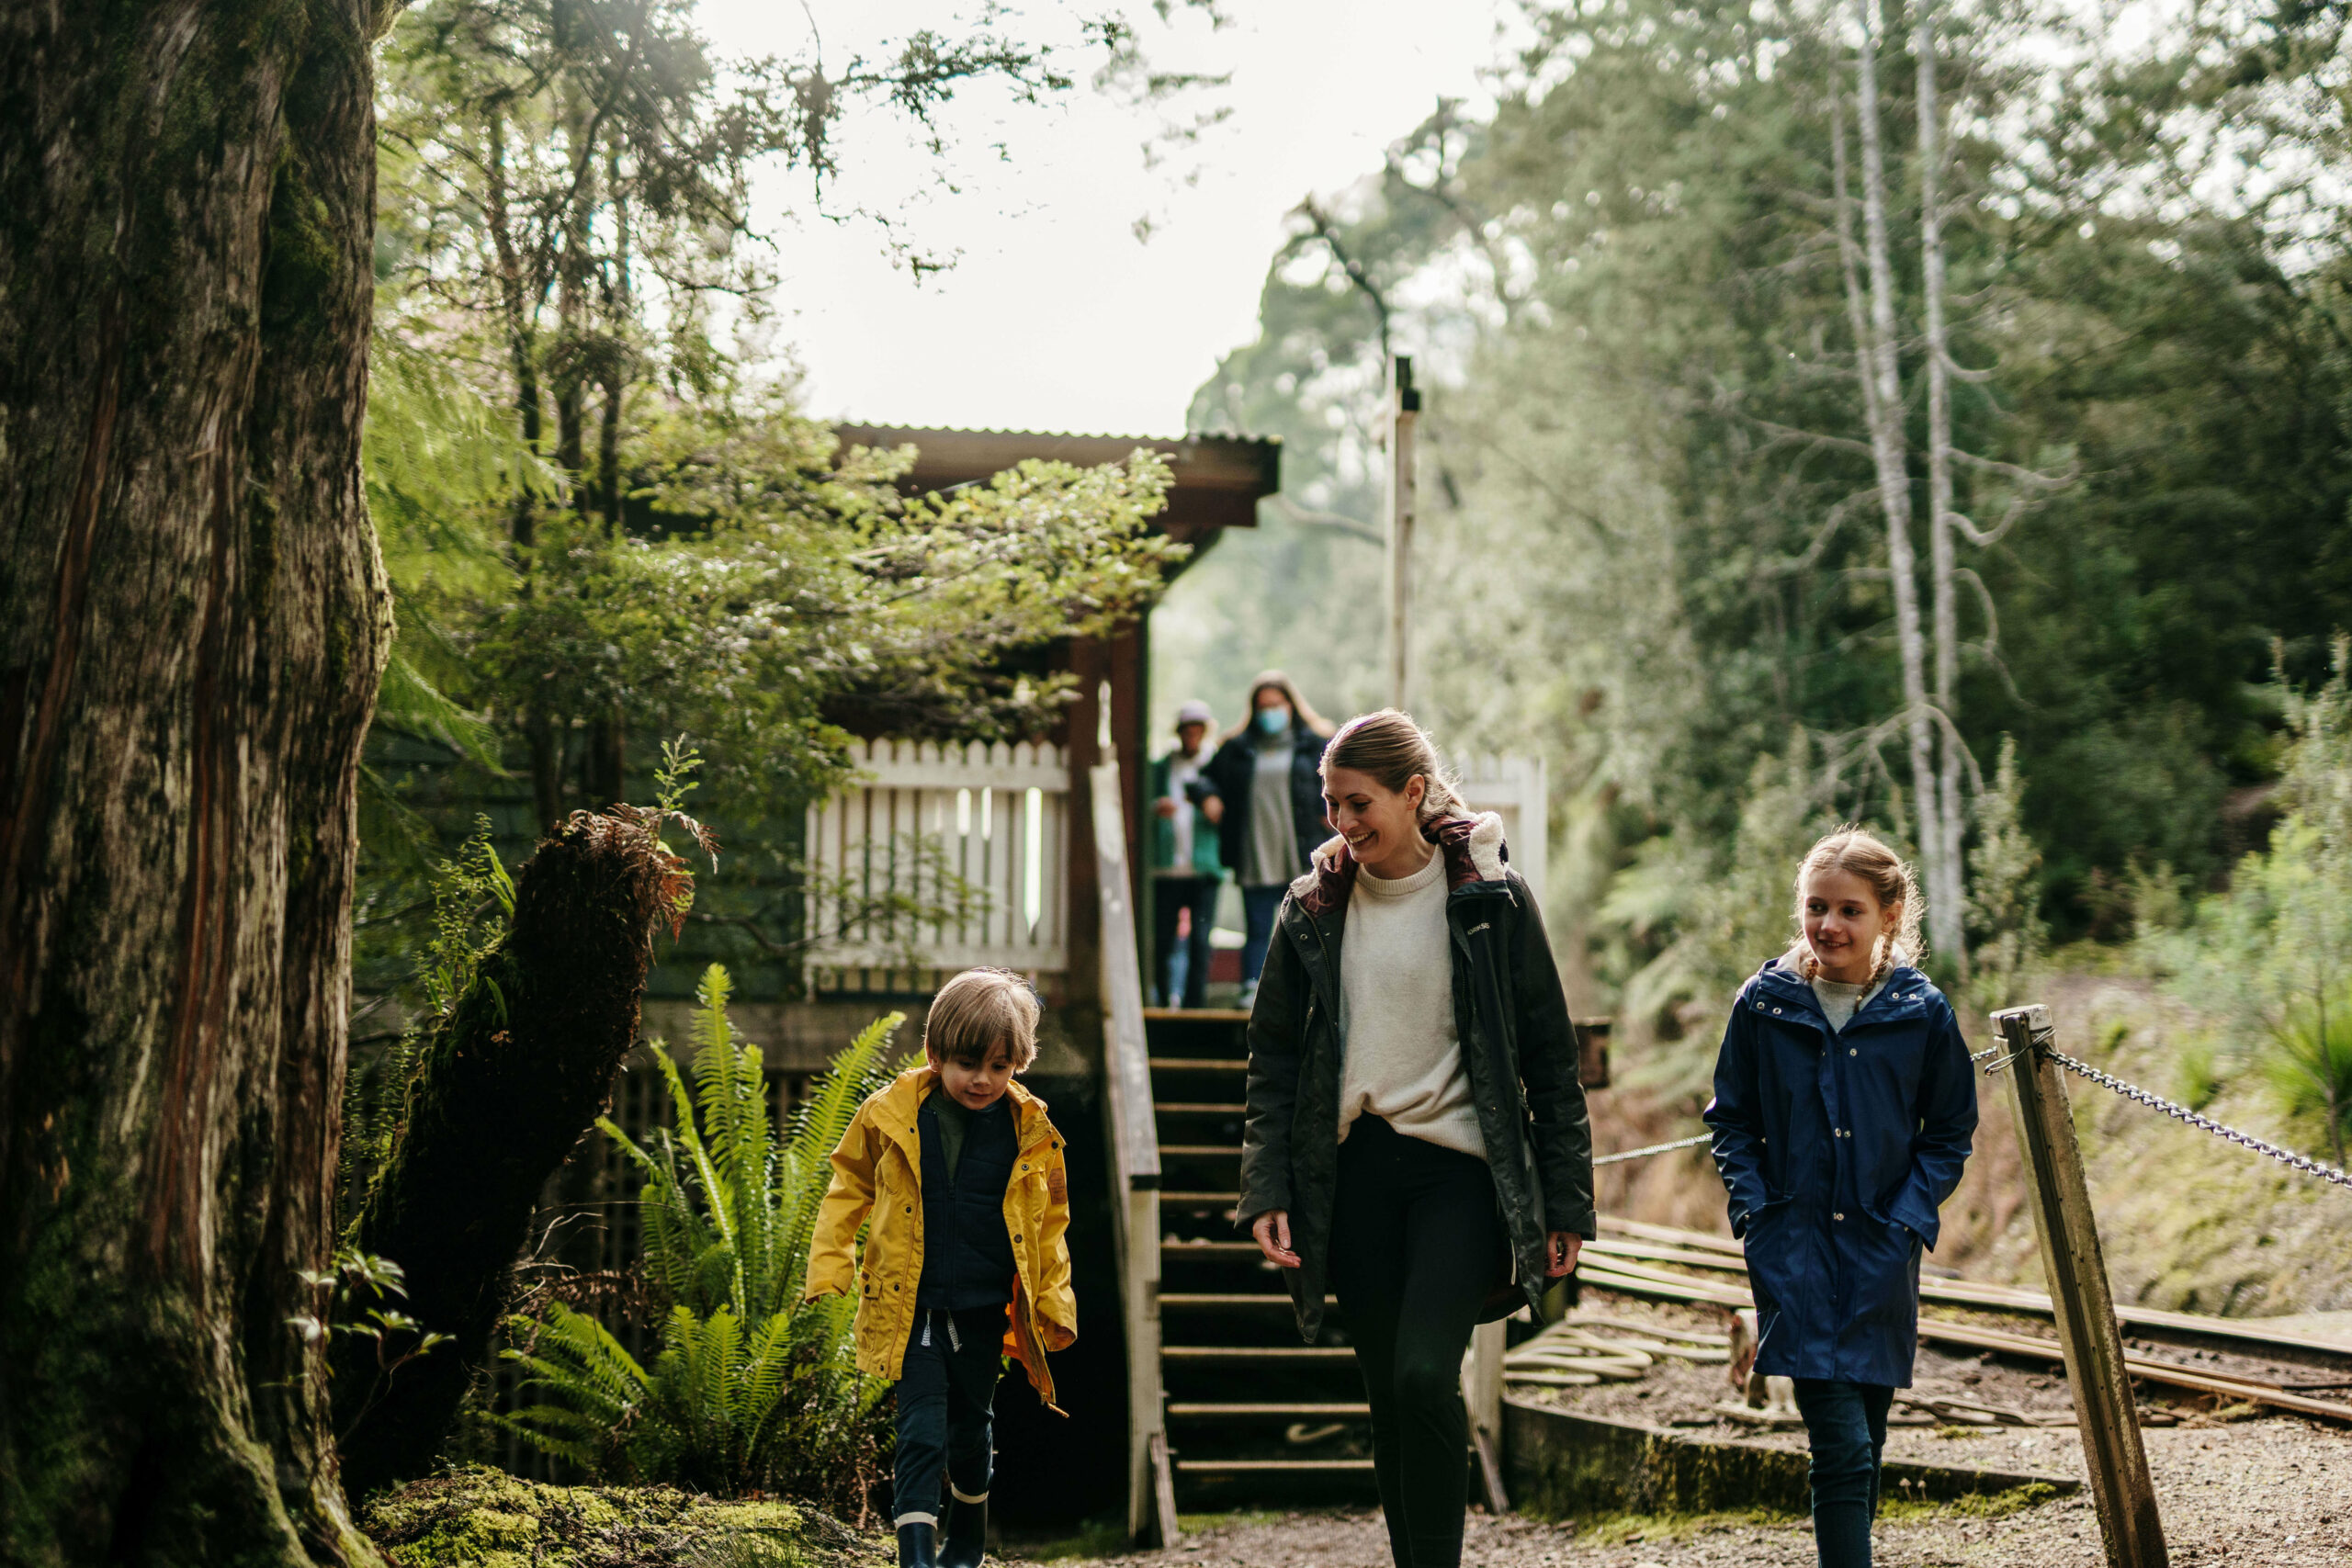 A woman wearing a dark jacket and white top accompanies two small children into the rainforest. They are walking away from the platform, which is accessed via wooden stairs. The train track is behind them and to the right.